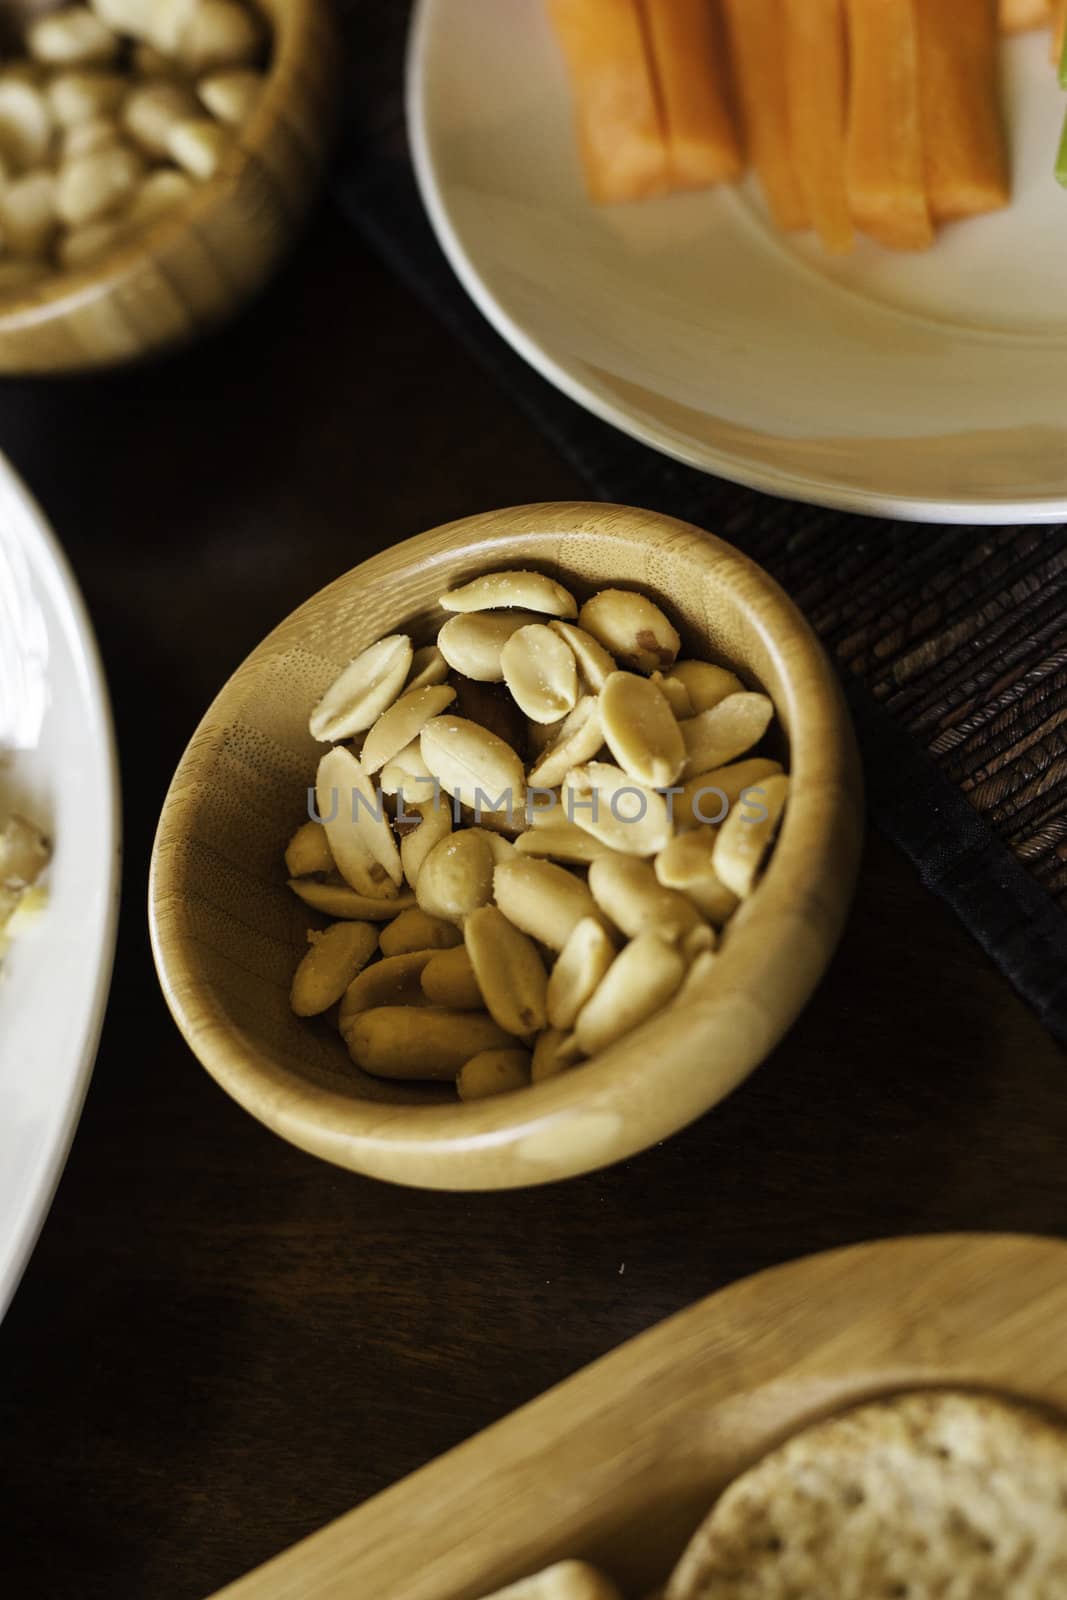 Bowl of salted peanuts served as an appetizer with drinks before a catered meal or at a party